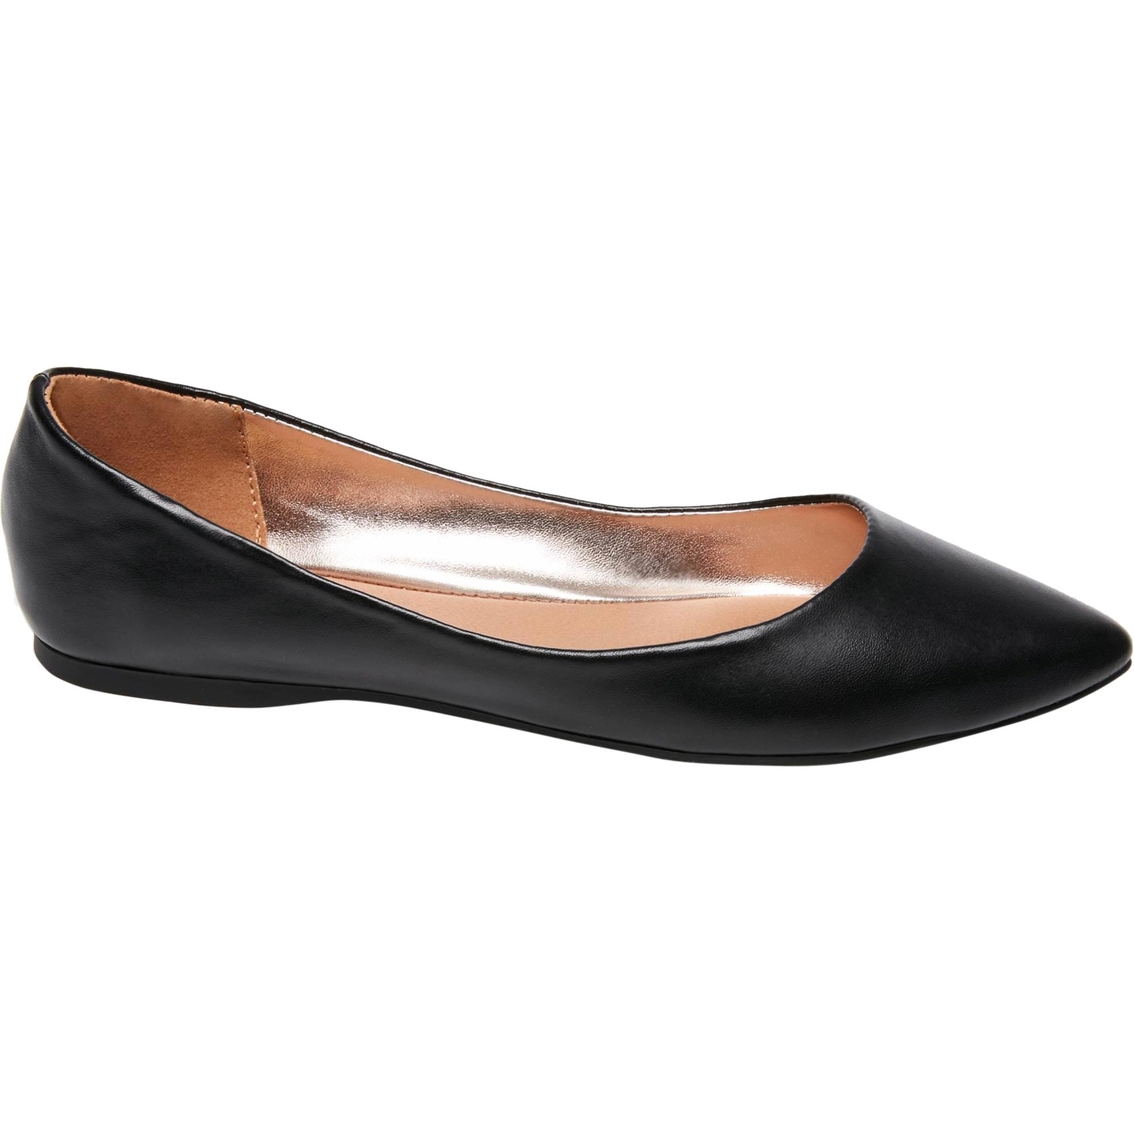 Madden Girl Ediee Pointed Toe Flats | Flats | Shoes | Shop The Exchange